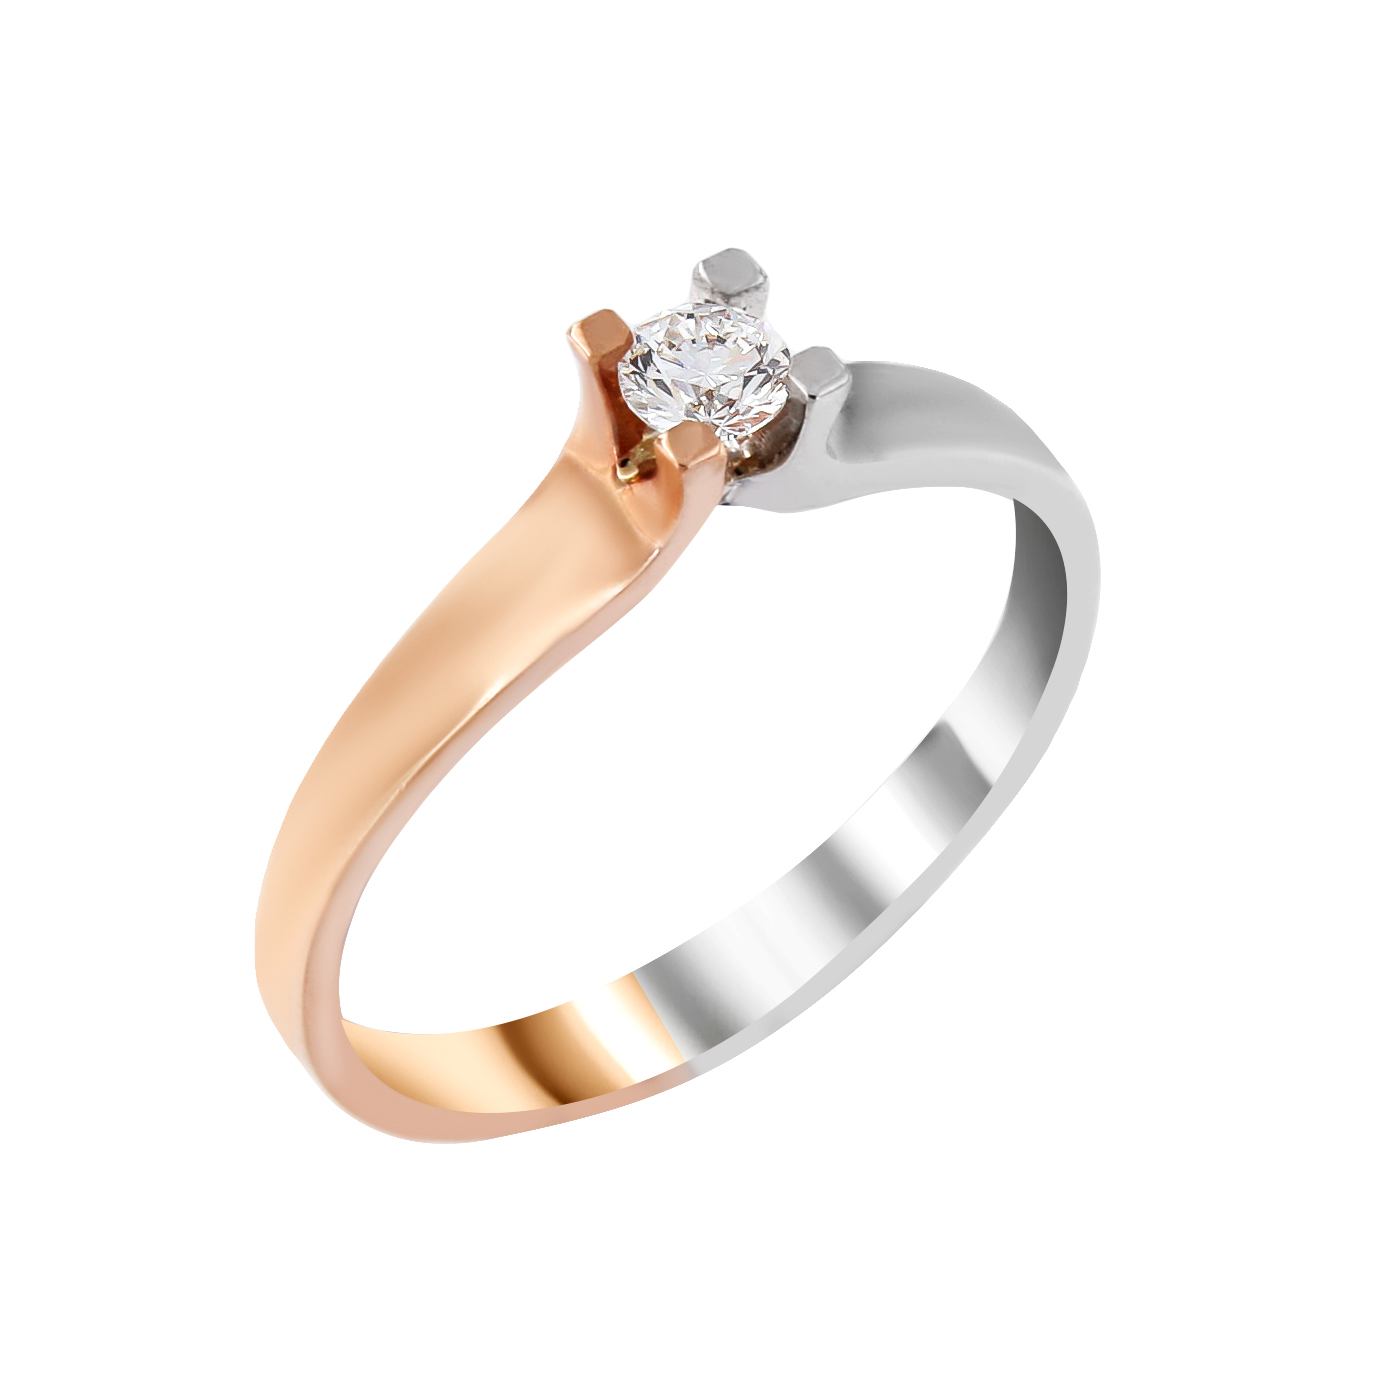 WHITE GOLD AND ROSEGOLD 18K RING WITH DIAMONDS 43925